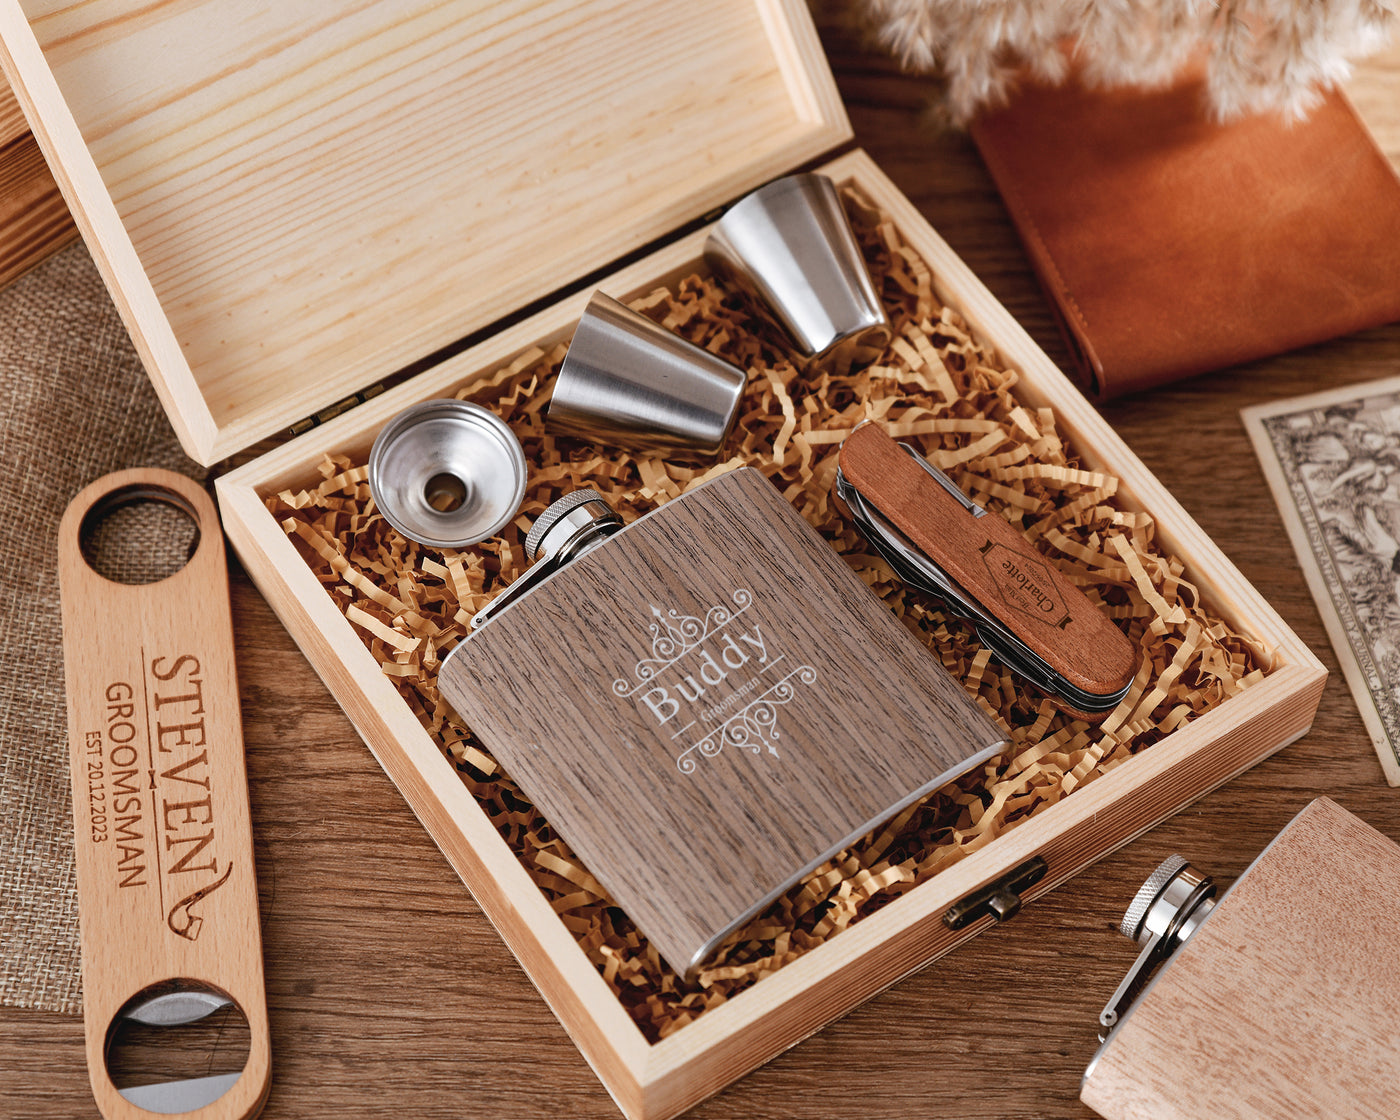 Personalized Wood Flask Gift Set, Engraved Flask, Custom Multi-Tool, Stainless Steel, Groomsmen Gifts, Wedding Party, Father's Day